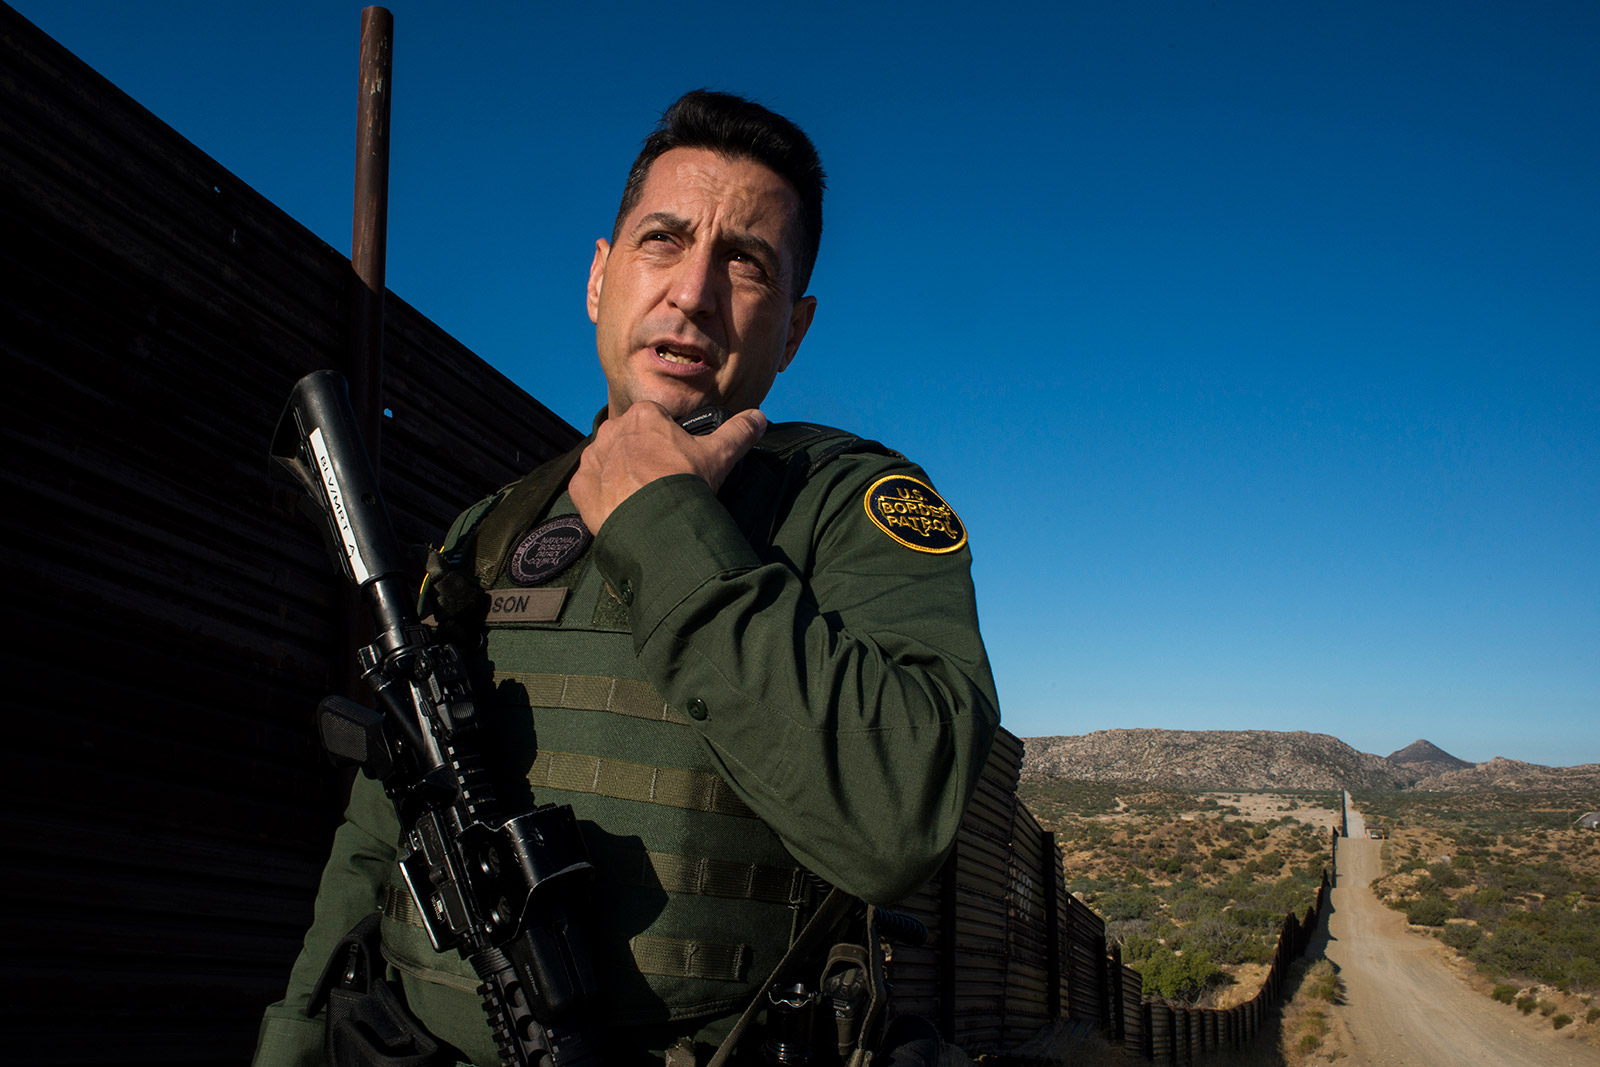 Border Patrol agent Joshua Wilson radios dispatchers to notify them of his location while touring the U.S.-Mexico border near Jacumba in eastern San Diego County on Sept. 5, 2017. <em>(Brandon Quester/inewsource)</em>